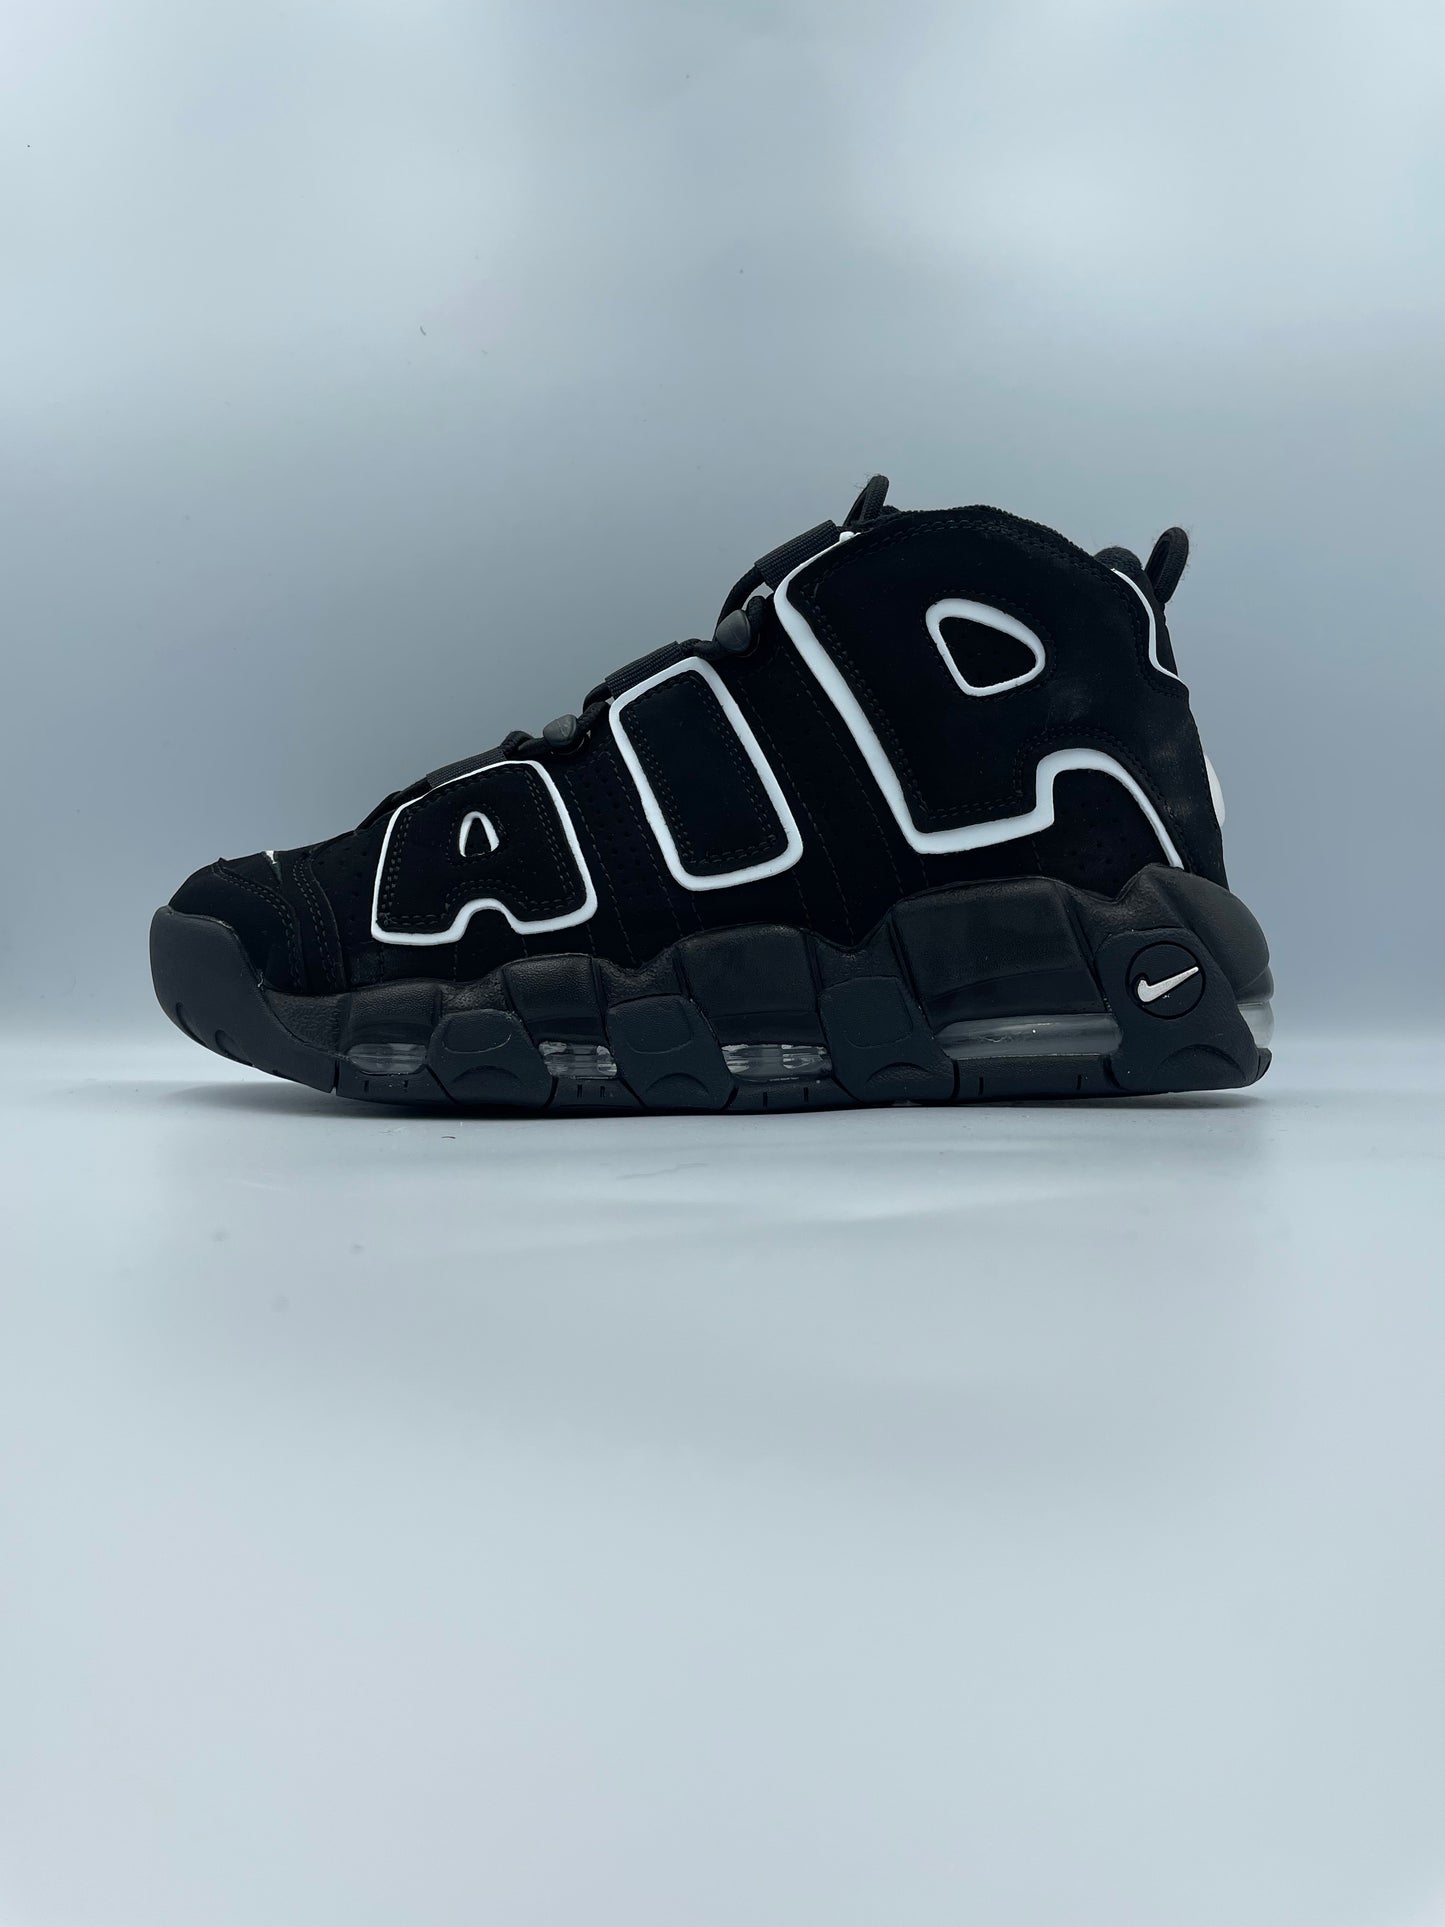 NIKE AIR MORE UPTEMPO 'OPSIDIAN BLACK'